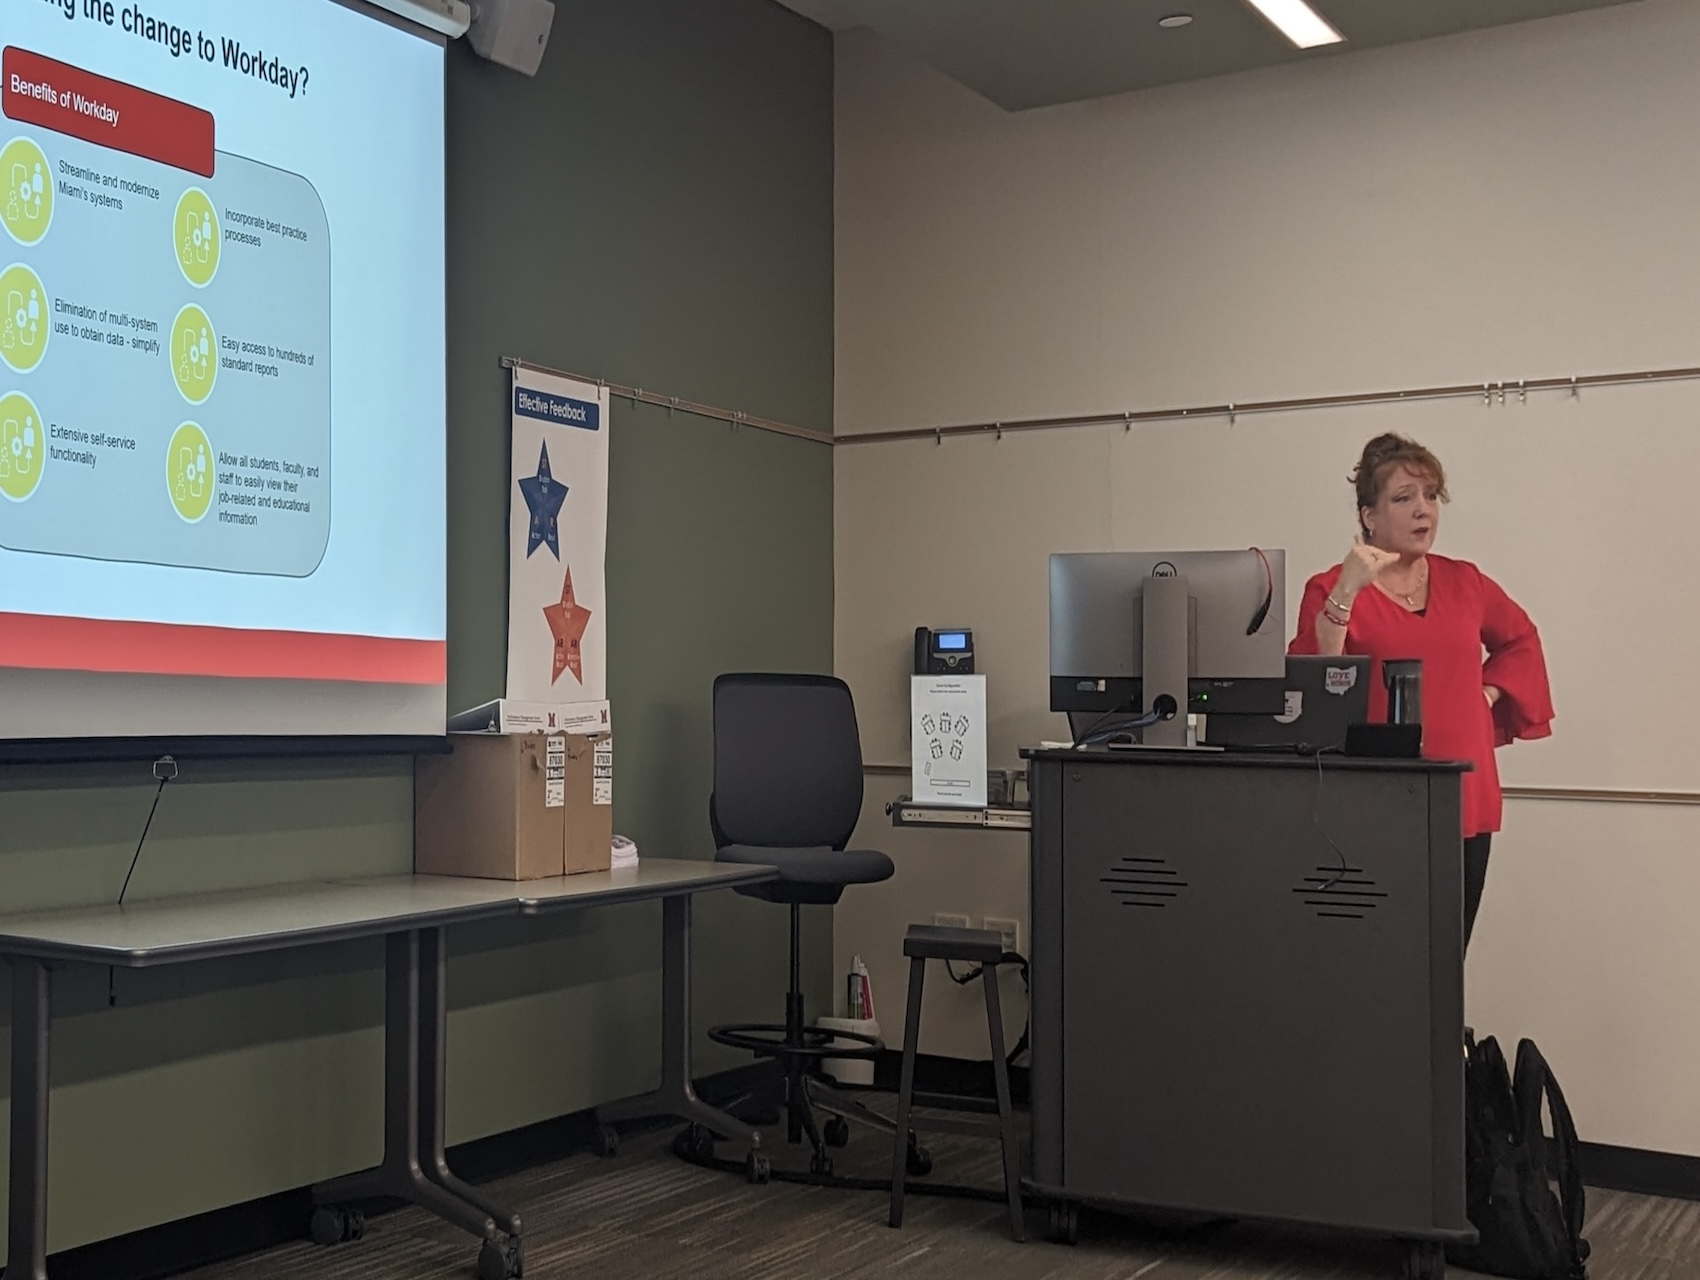 Sarah Persinger presenting at a recent Workday Roadshow at the Staff Development Center.